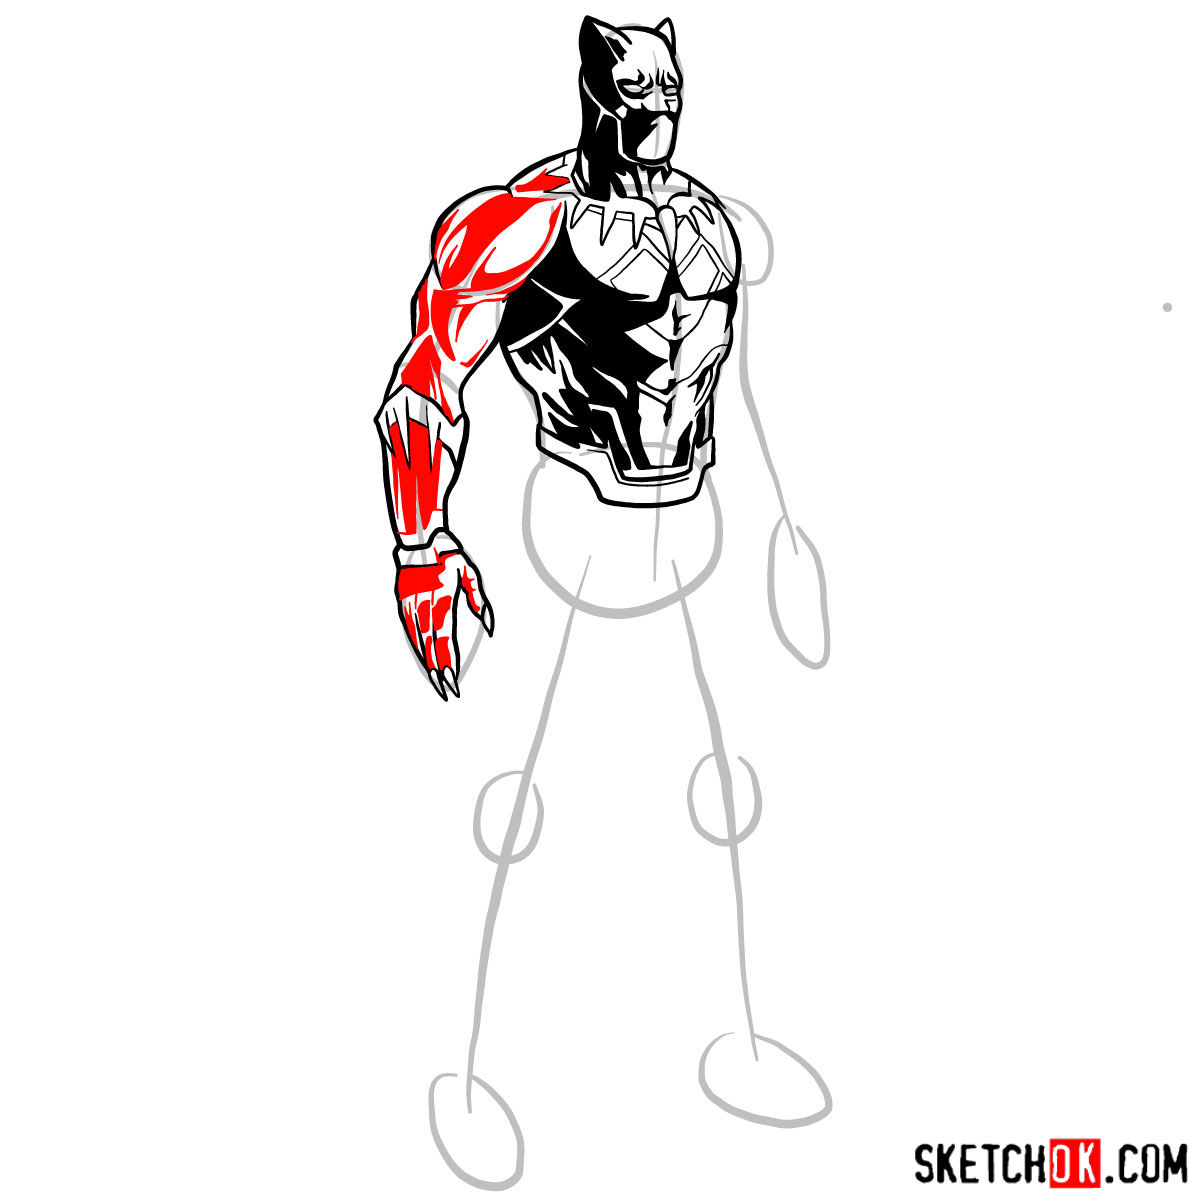 How to draw Black Panther from Marvel - step 10